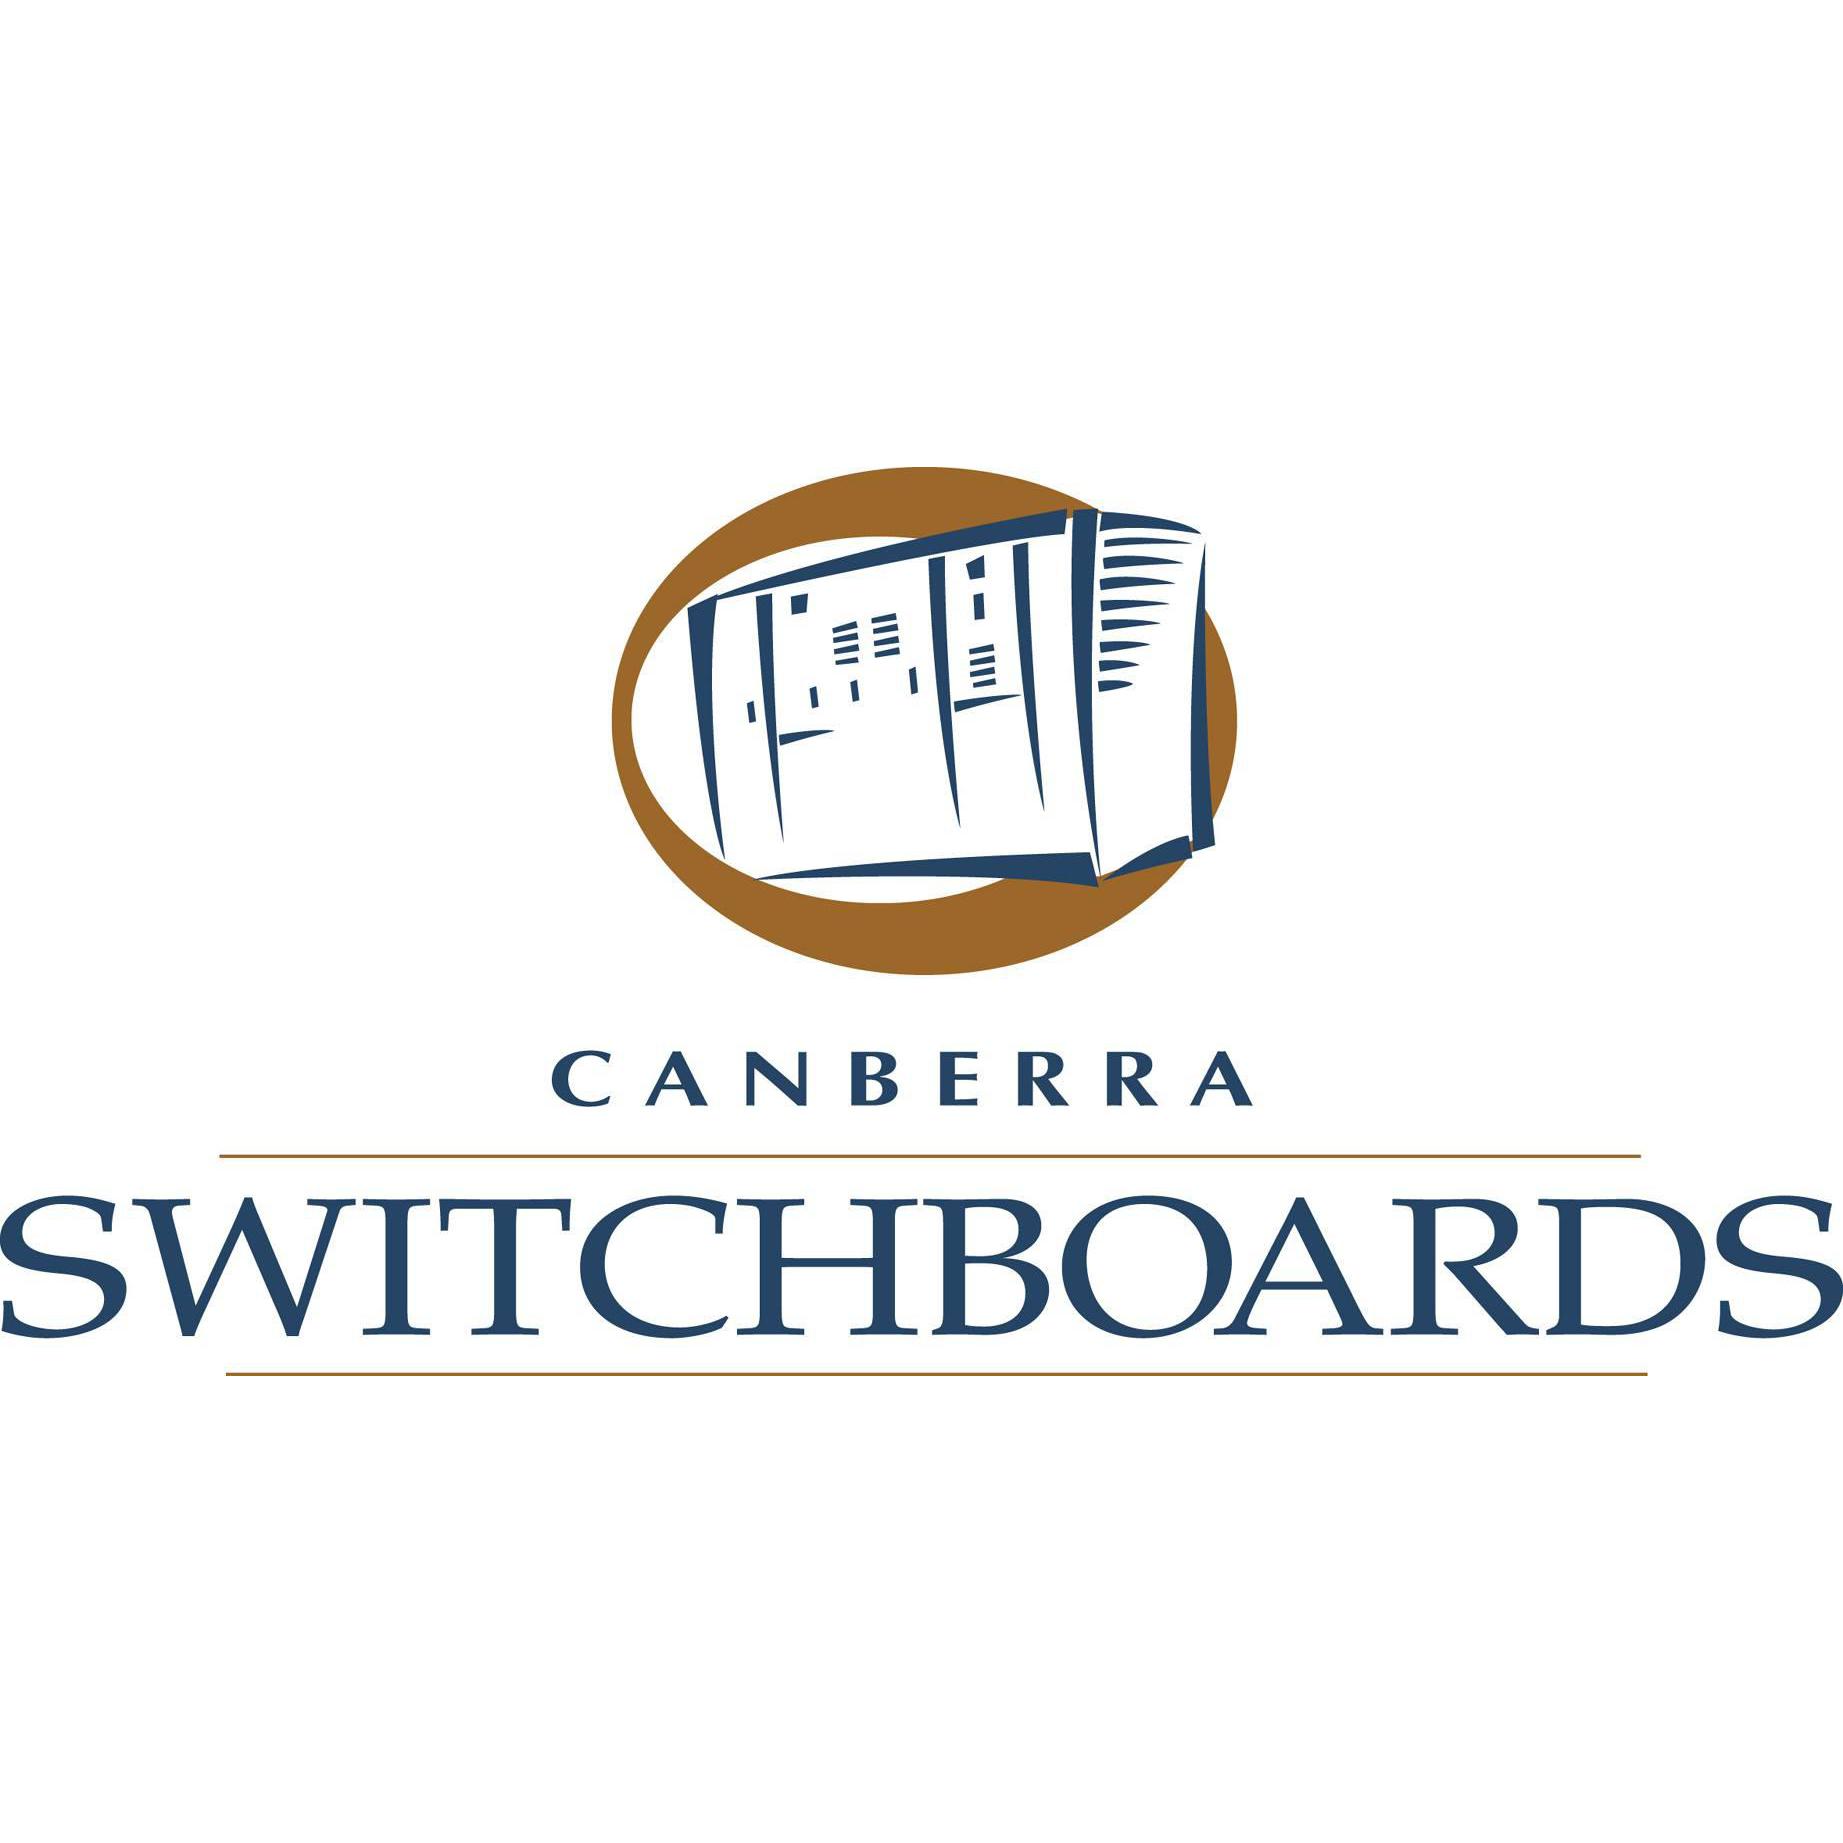 Canberra Switchboards - Queanbeyan East, NSW 2620 - (02) 6299 6232 | ShowMeLocal.com